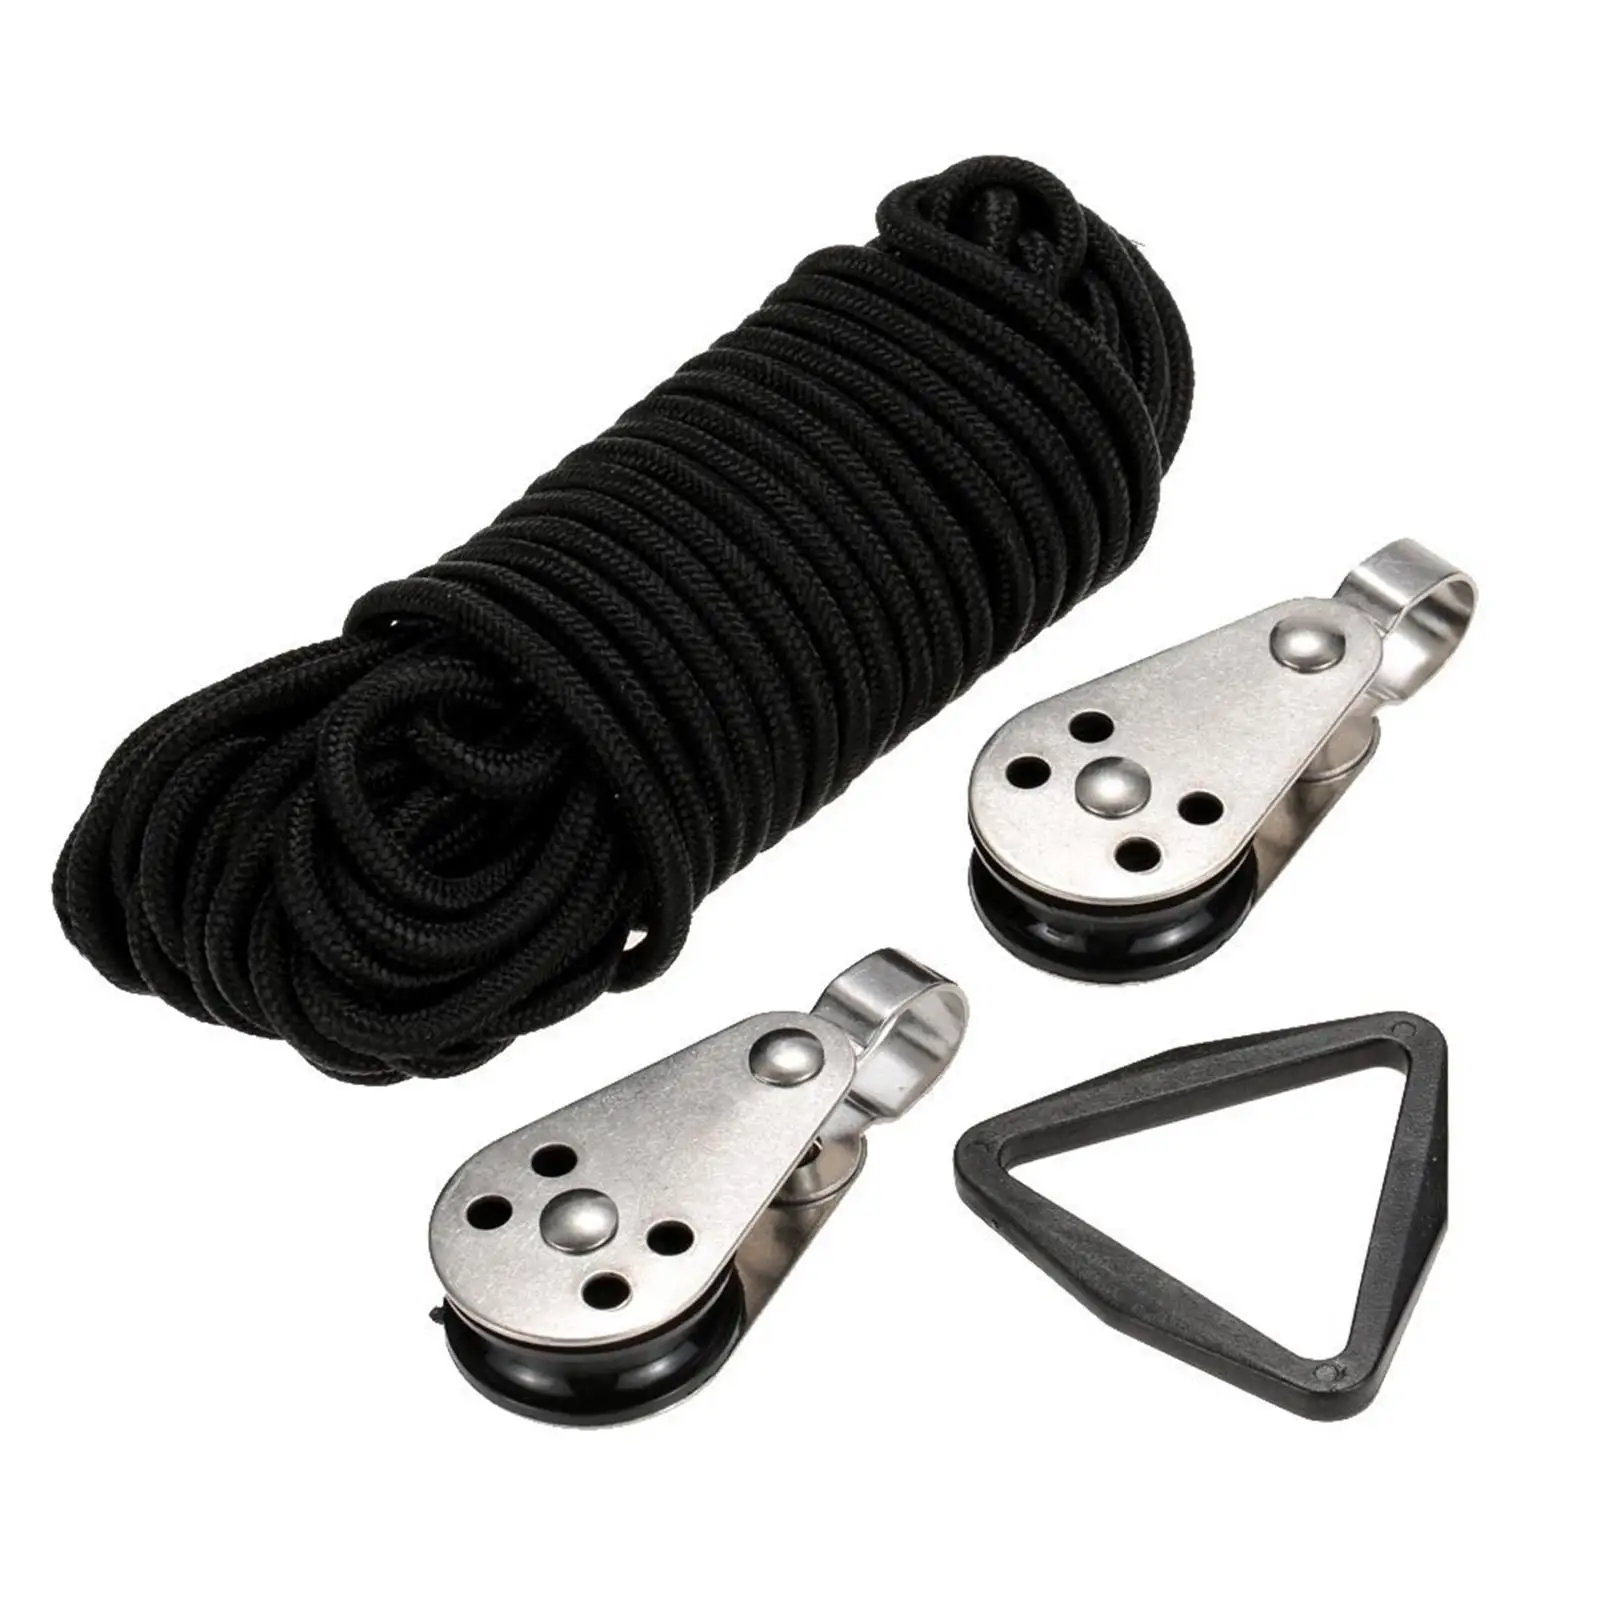 Kayak Canoe Anchor Trolley Kit System Pulley Cleat Pad Eye Ring with 30ft Rope